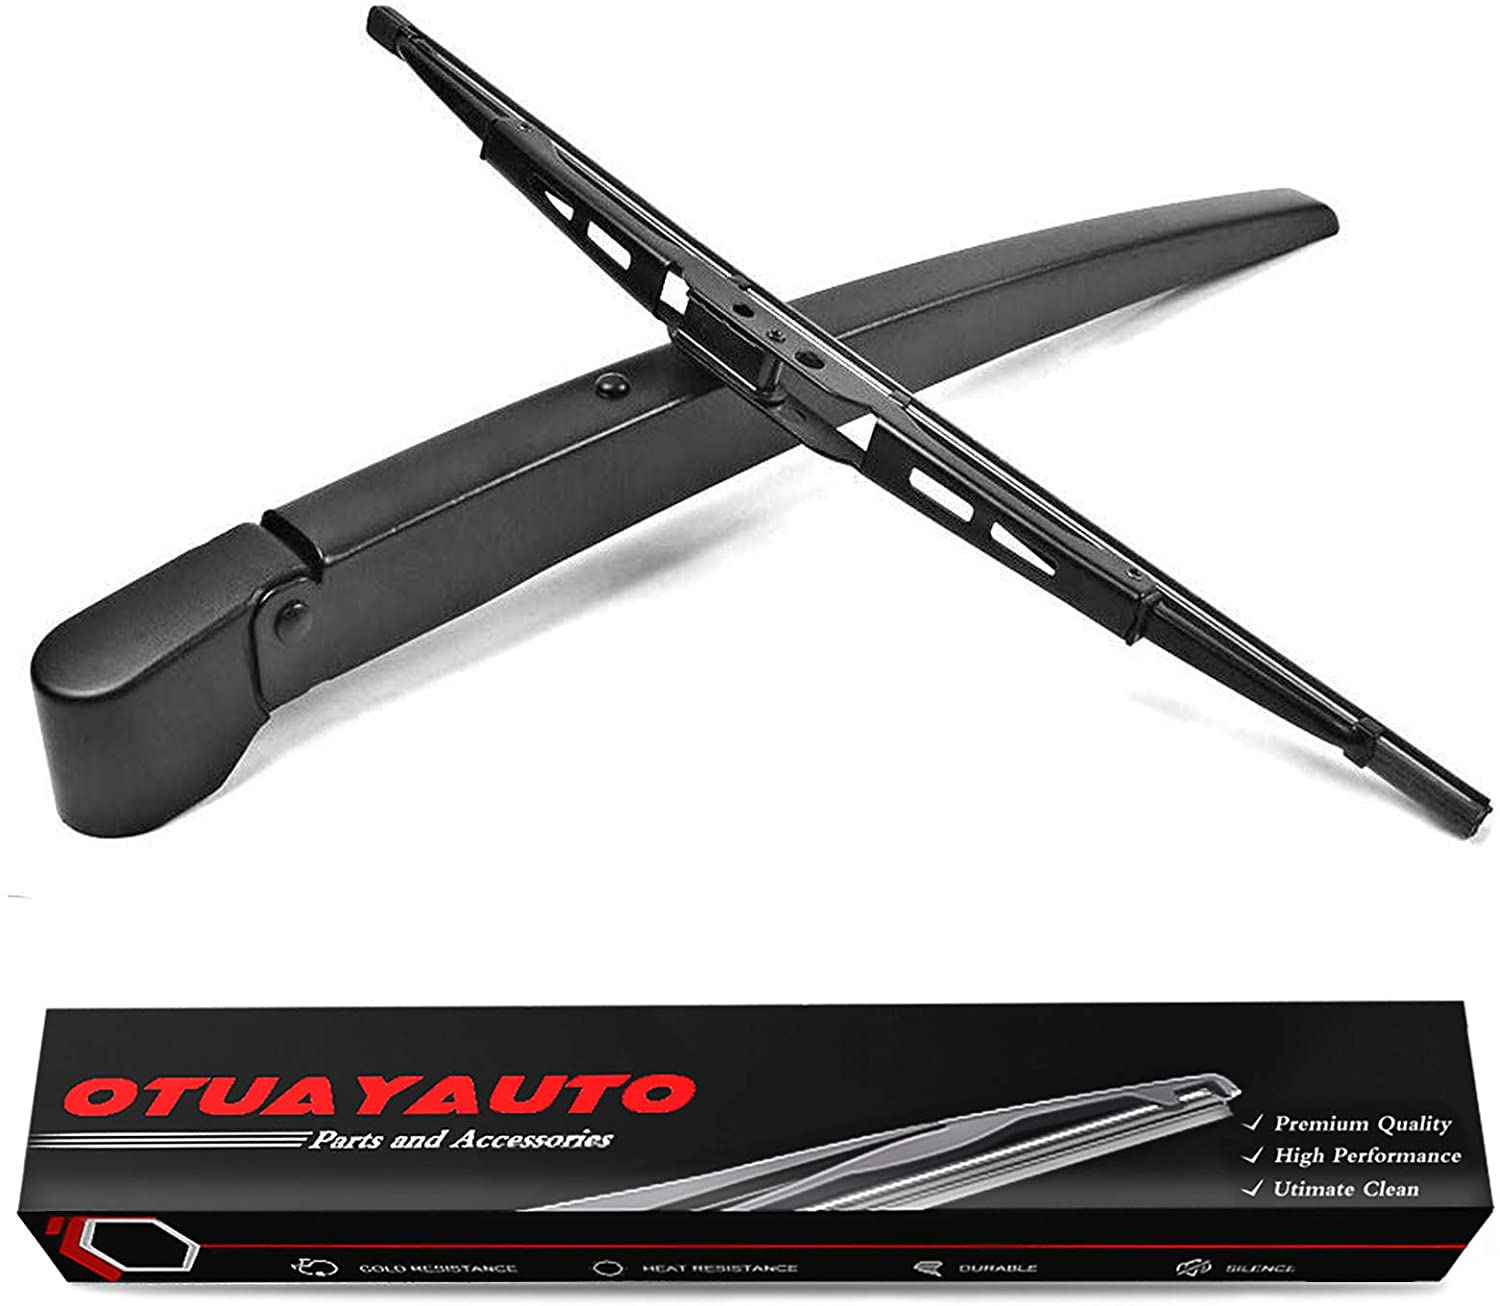 OTUAYAUTO 20935081 Rear Windshield Wiper Arm Blade Set - Replacement for Traverse 2010-2012